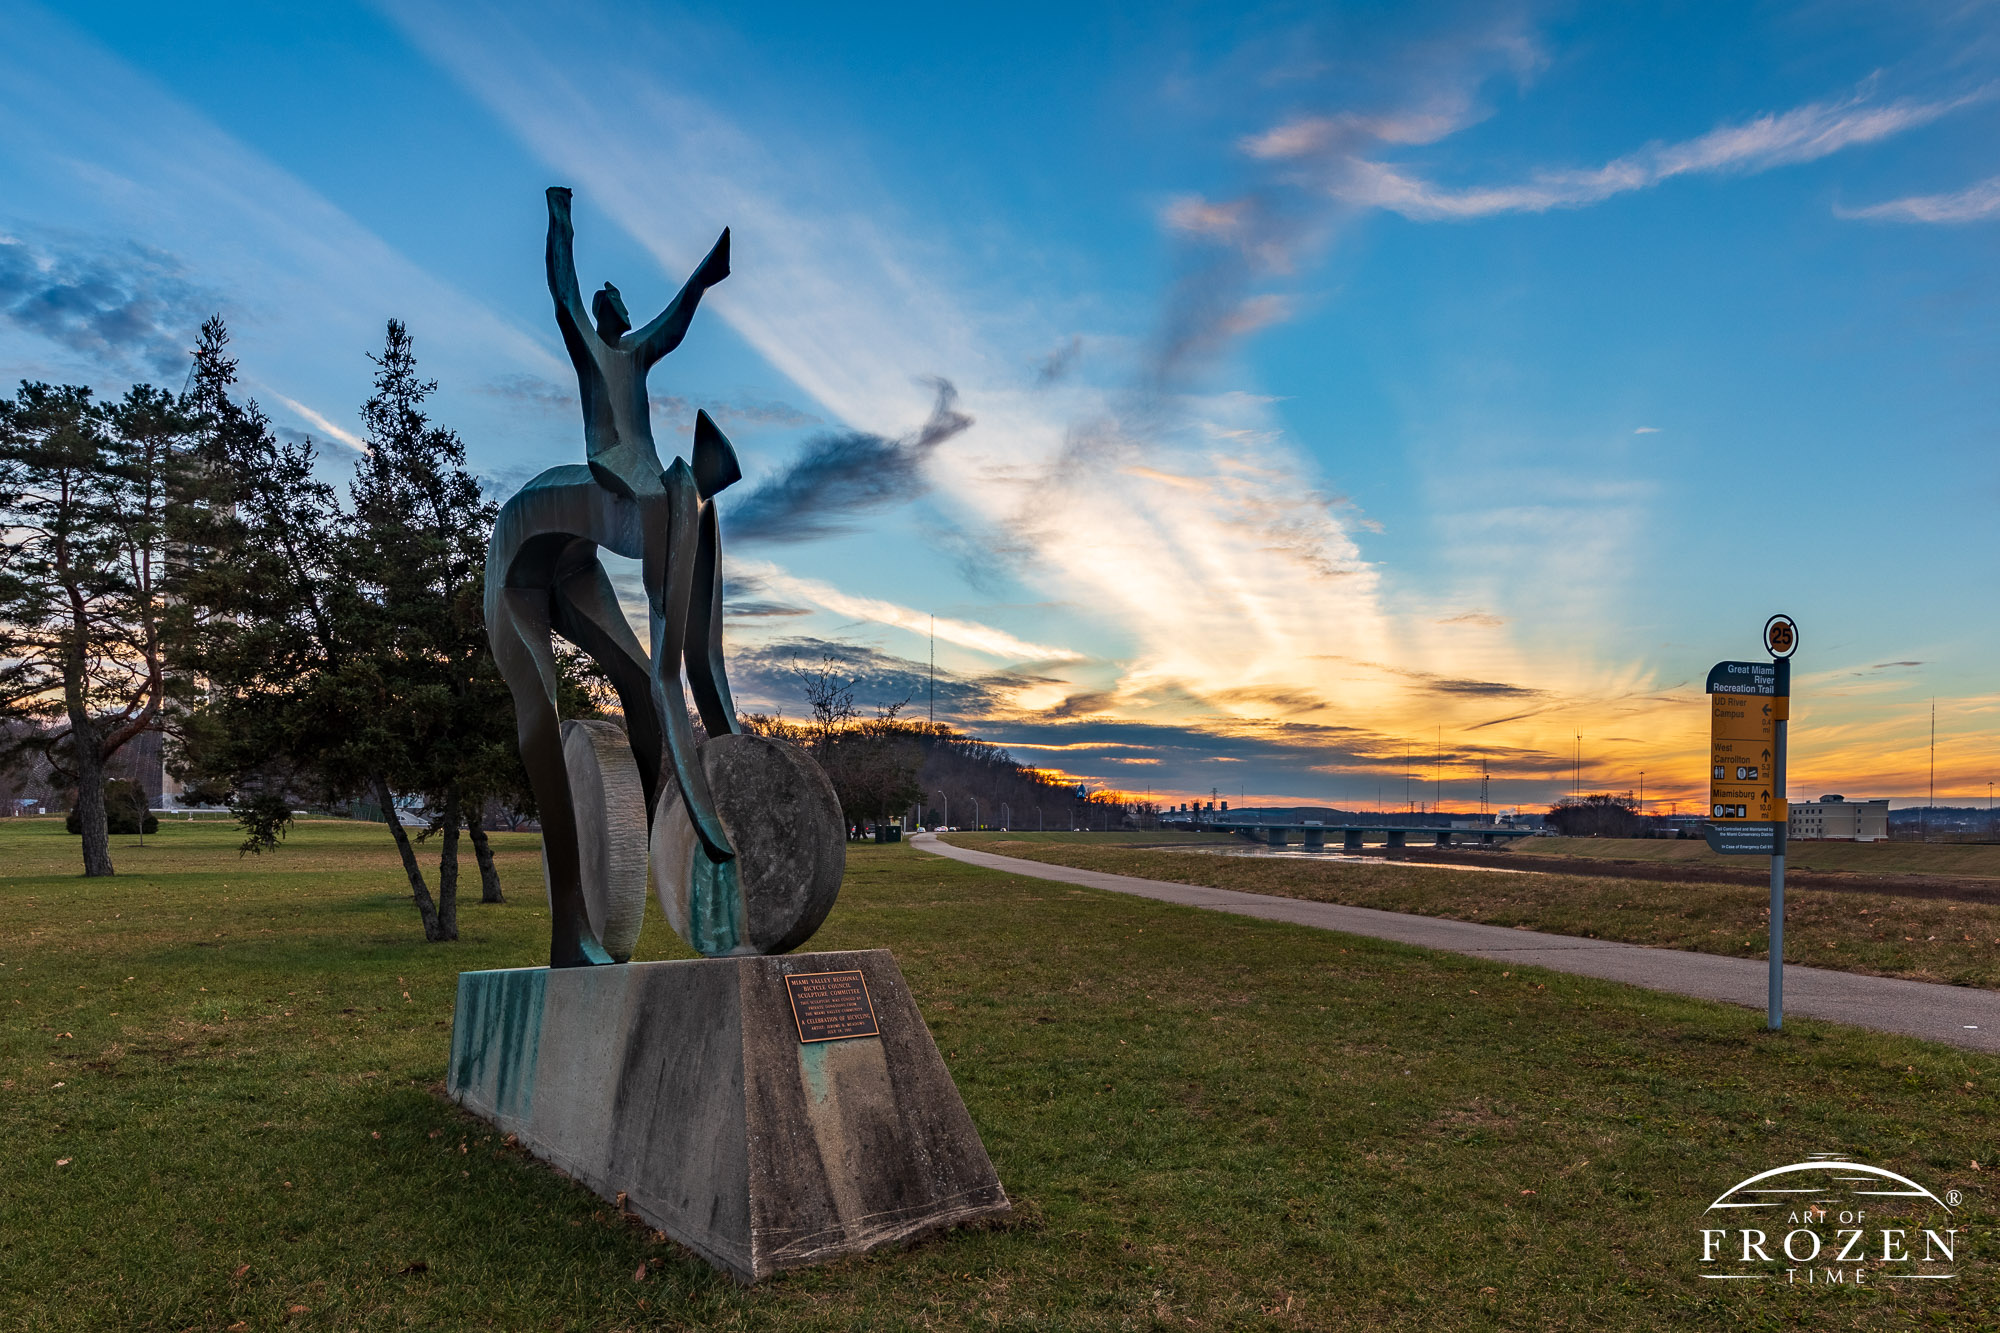 A sculpture which celebrates bicycling shows a human form riding handsfree with arms stretched skyway in this wispy sunset image along the Great Miami River trails